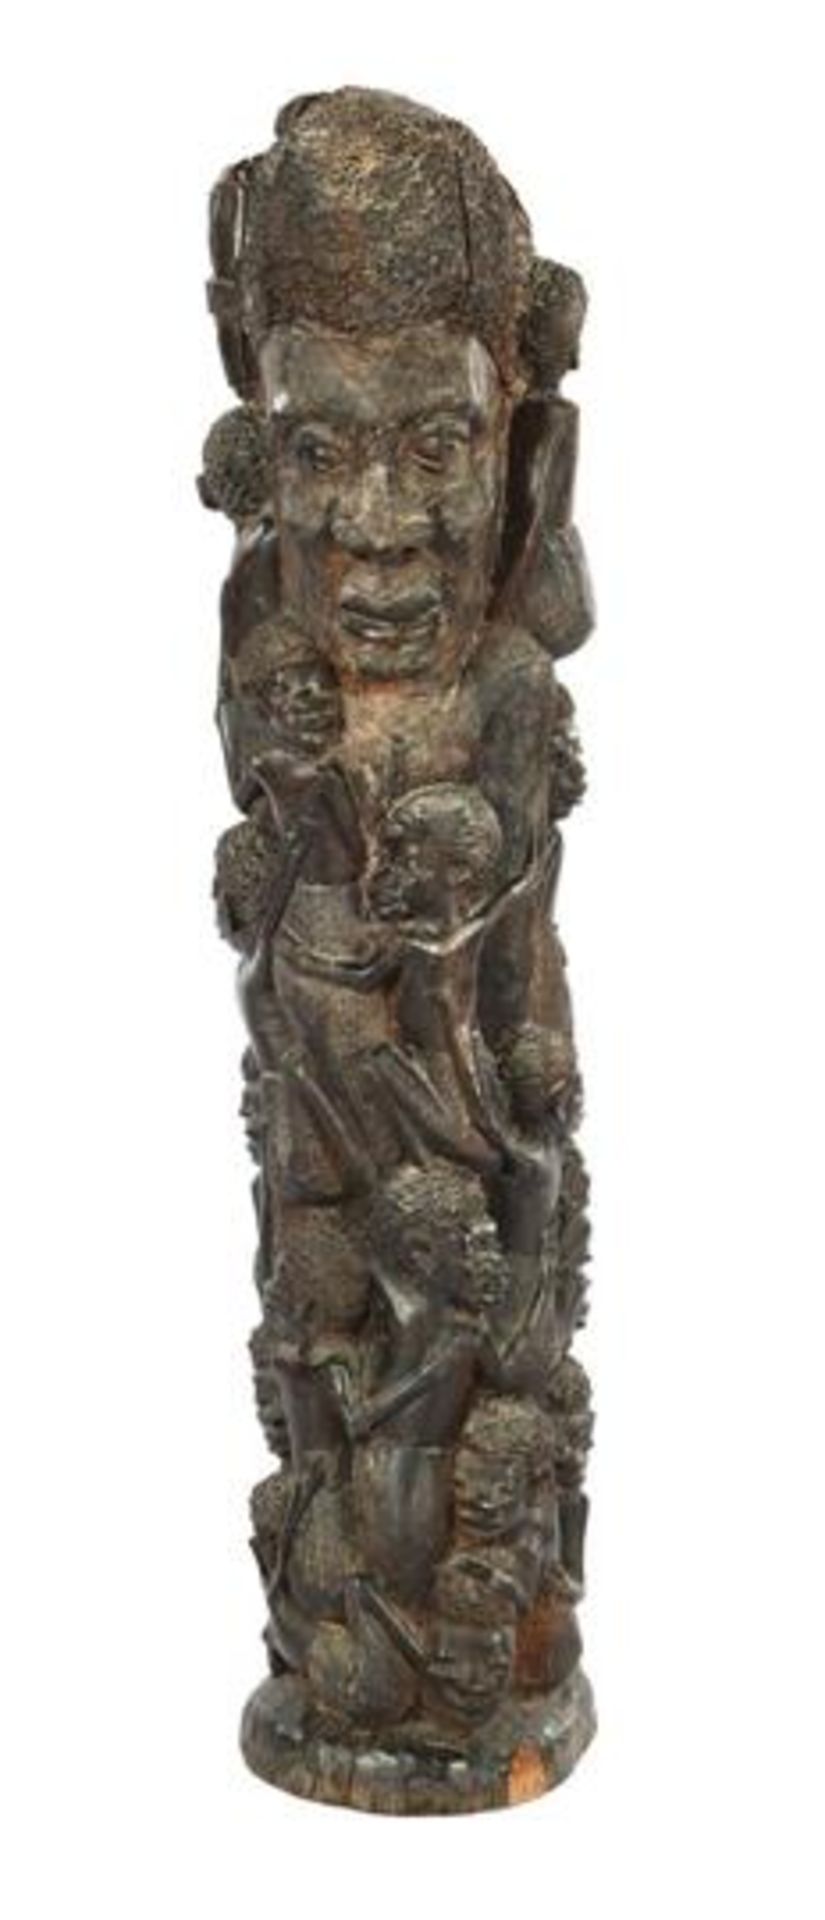 African coromandel wood richly decorated statue with many figures 81.5 cm high, 18 cm diameter